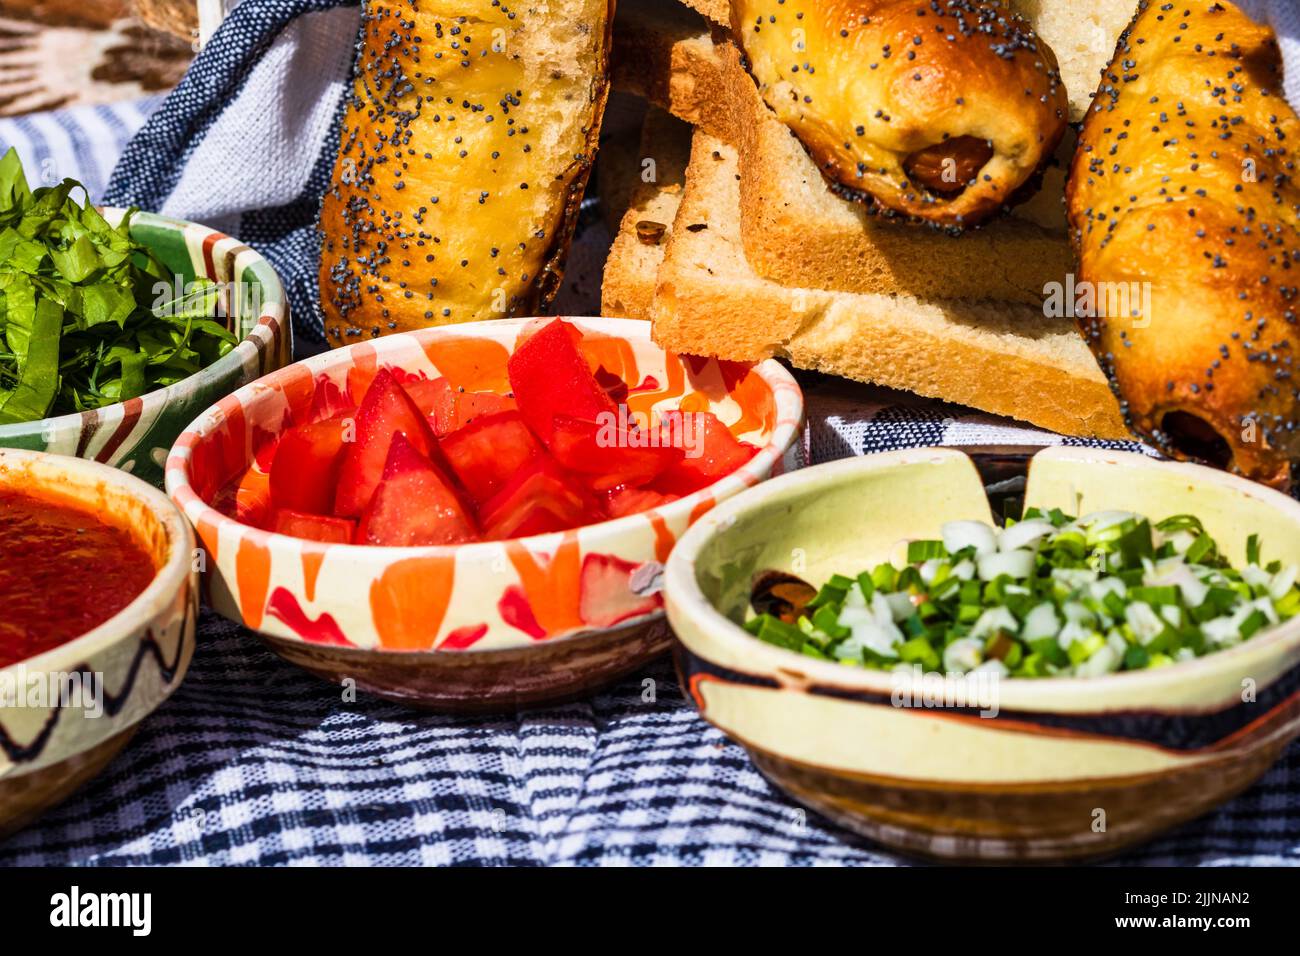 Rustic composition with sausages rolls and different bowls with sauce and chopped vegetables ( tomatoes, green lettuce, green onion, green garlic) Stock Photo